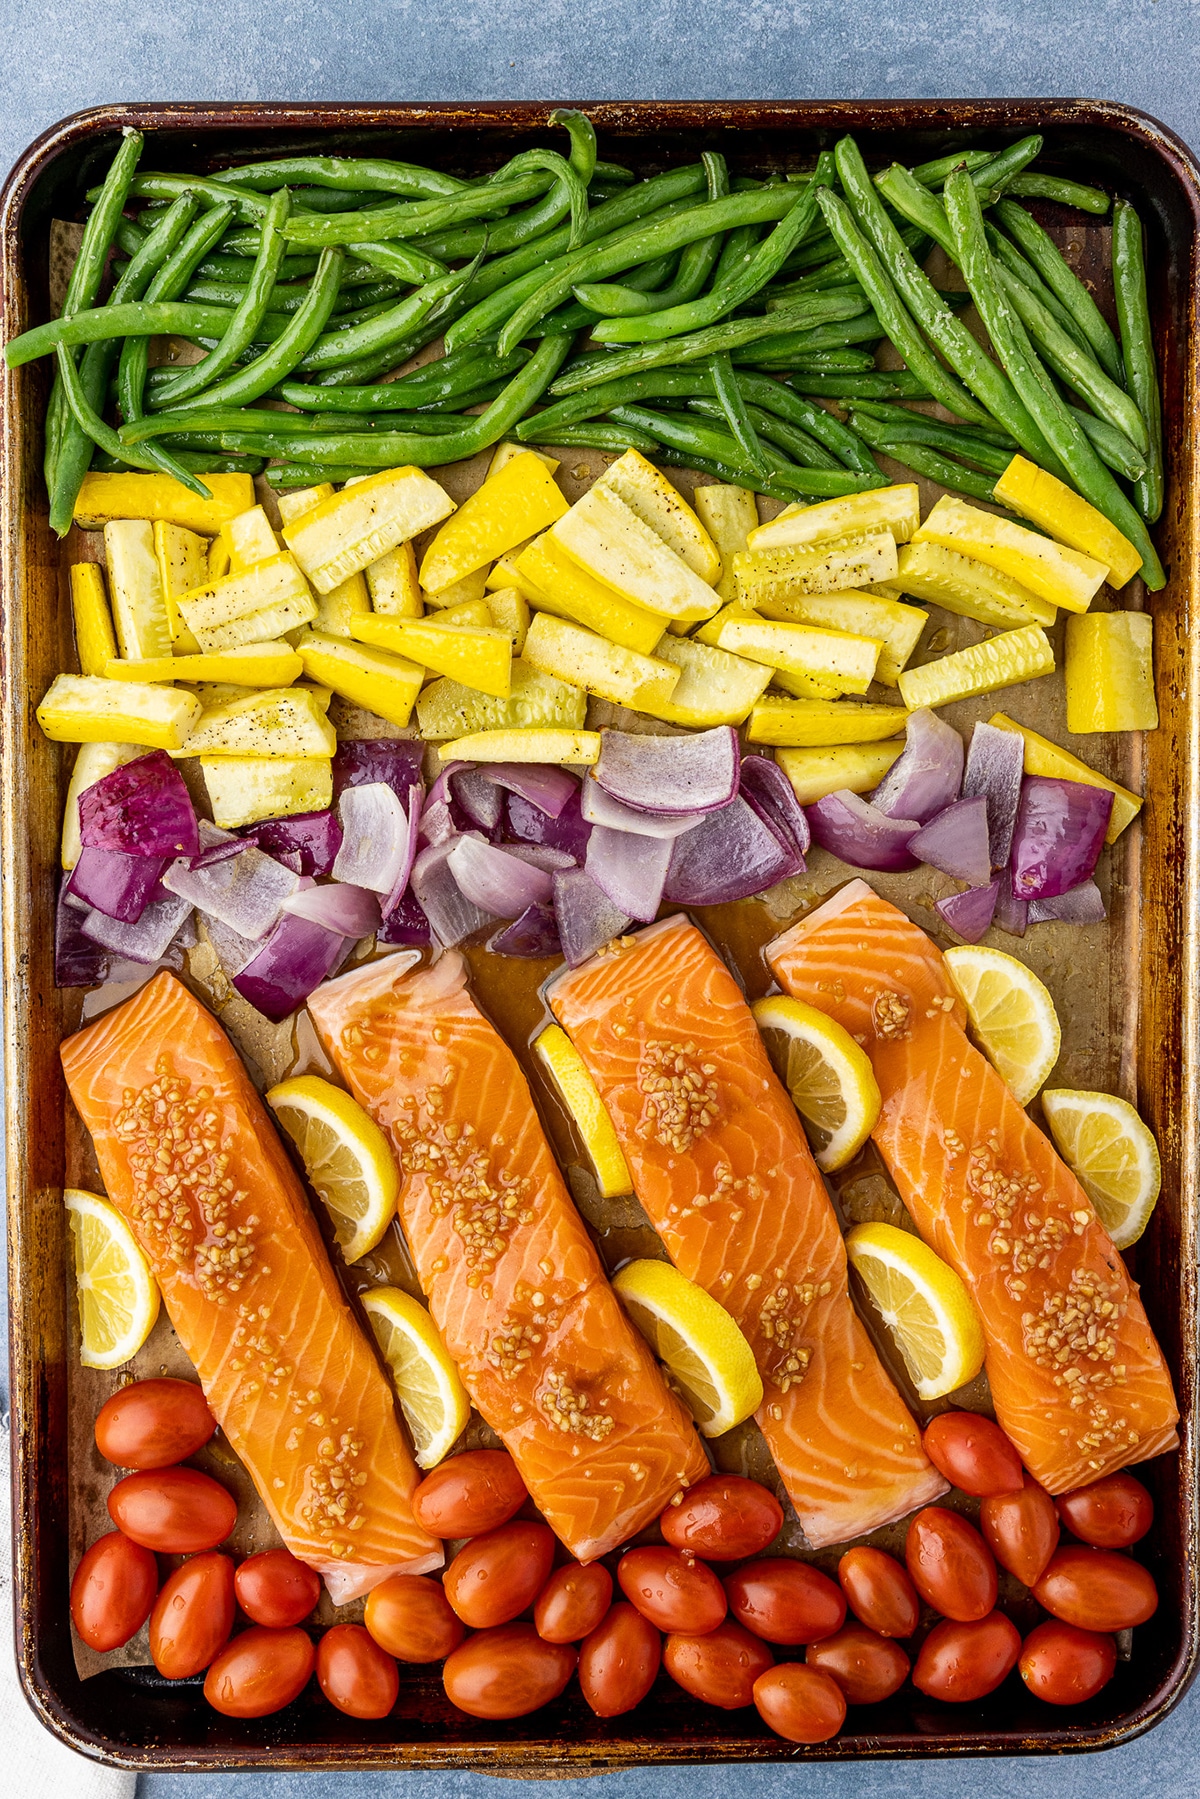 Sheet pan with a row of green beans, yellow squash, red onions, salmon filets, and cherry tomatoes, ready to be put in the oven.